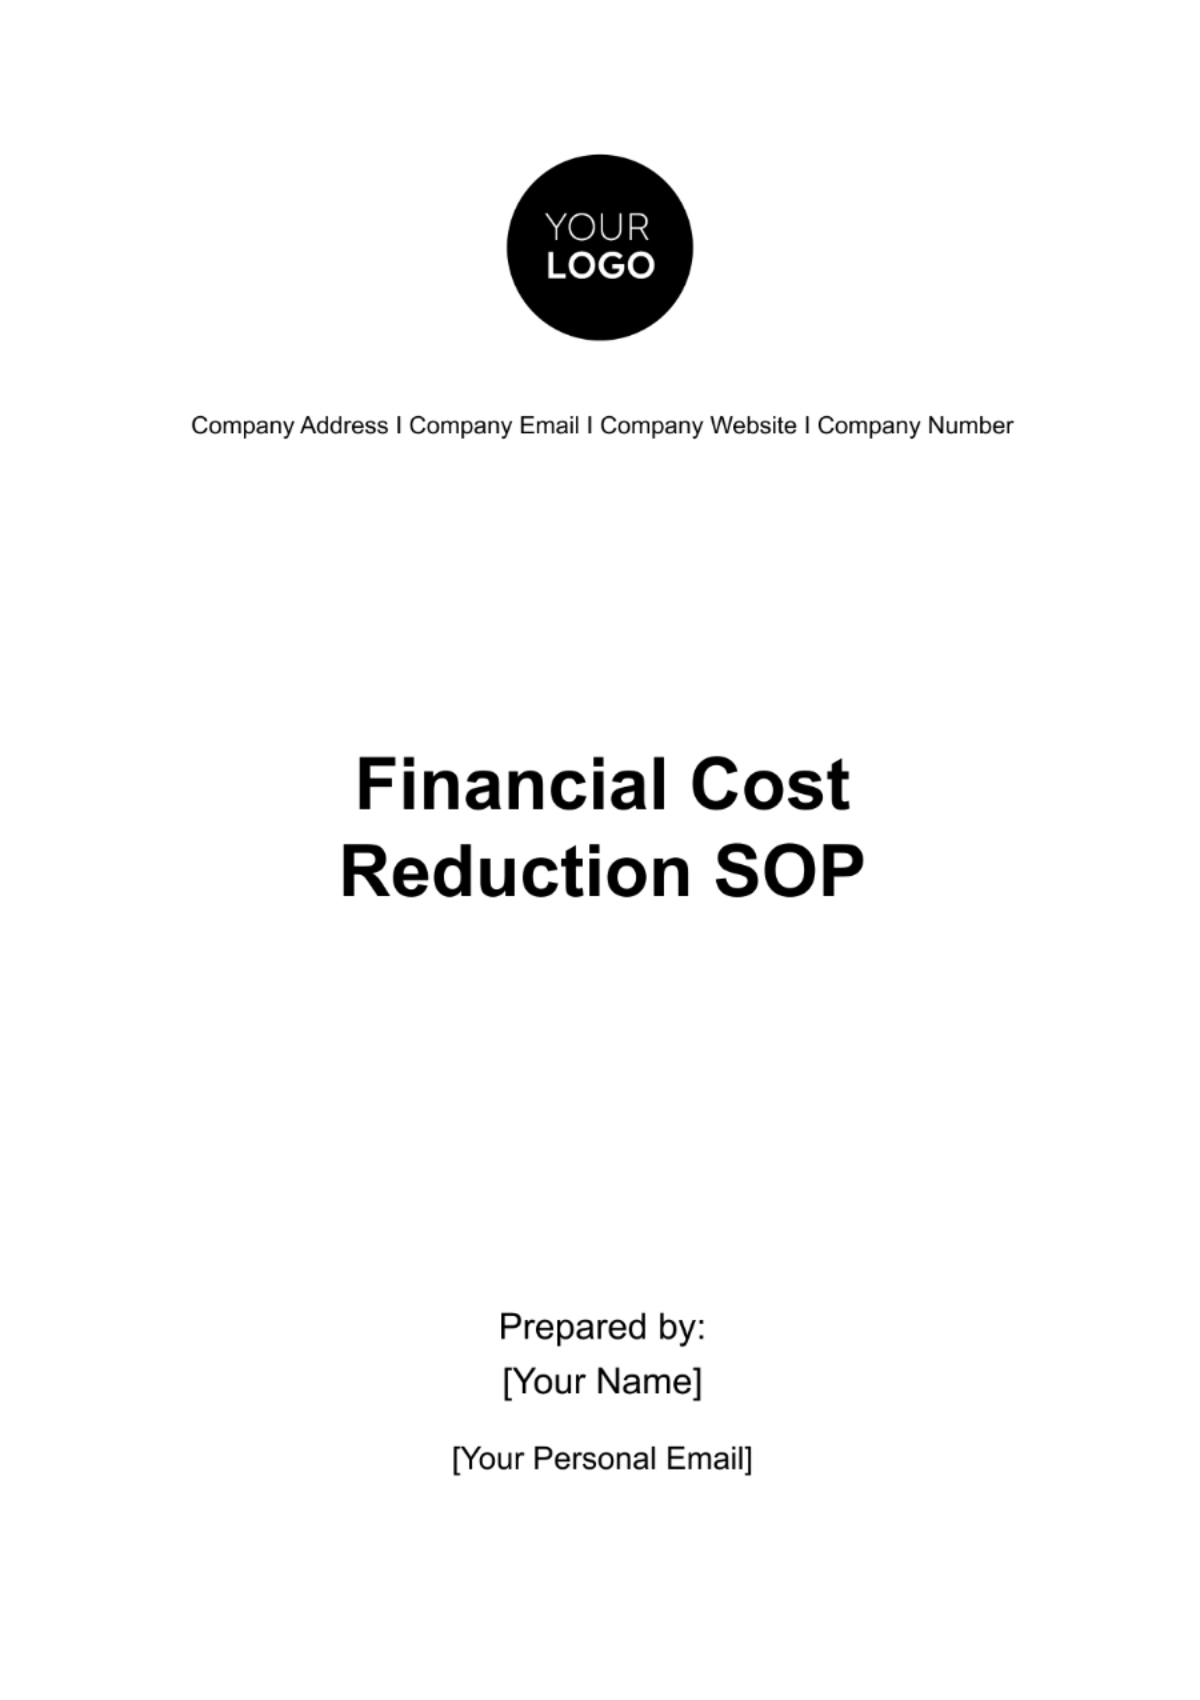 Free Financial Cost Reduction SOP Template